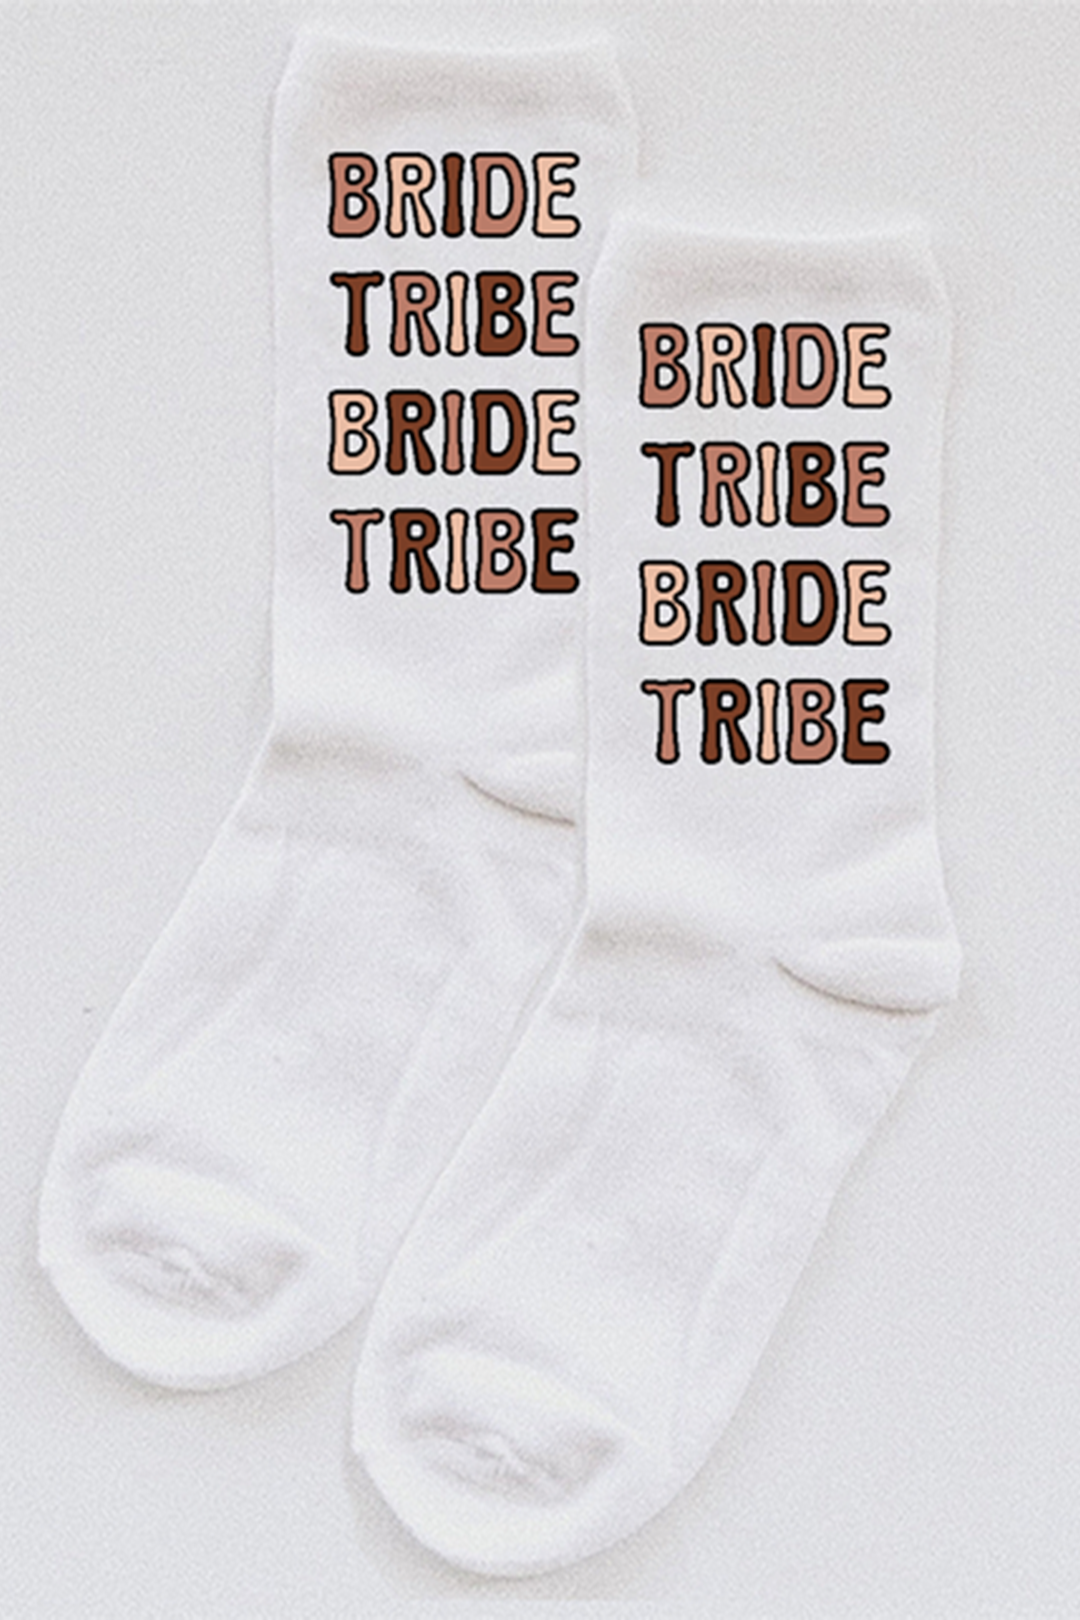 Bride Tribe Bubble Letter socks - choose your colors! – Spikes and Seams